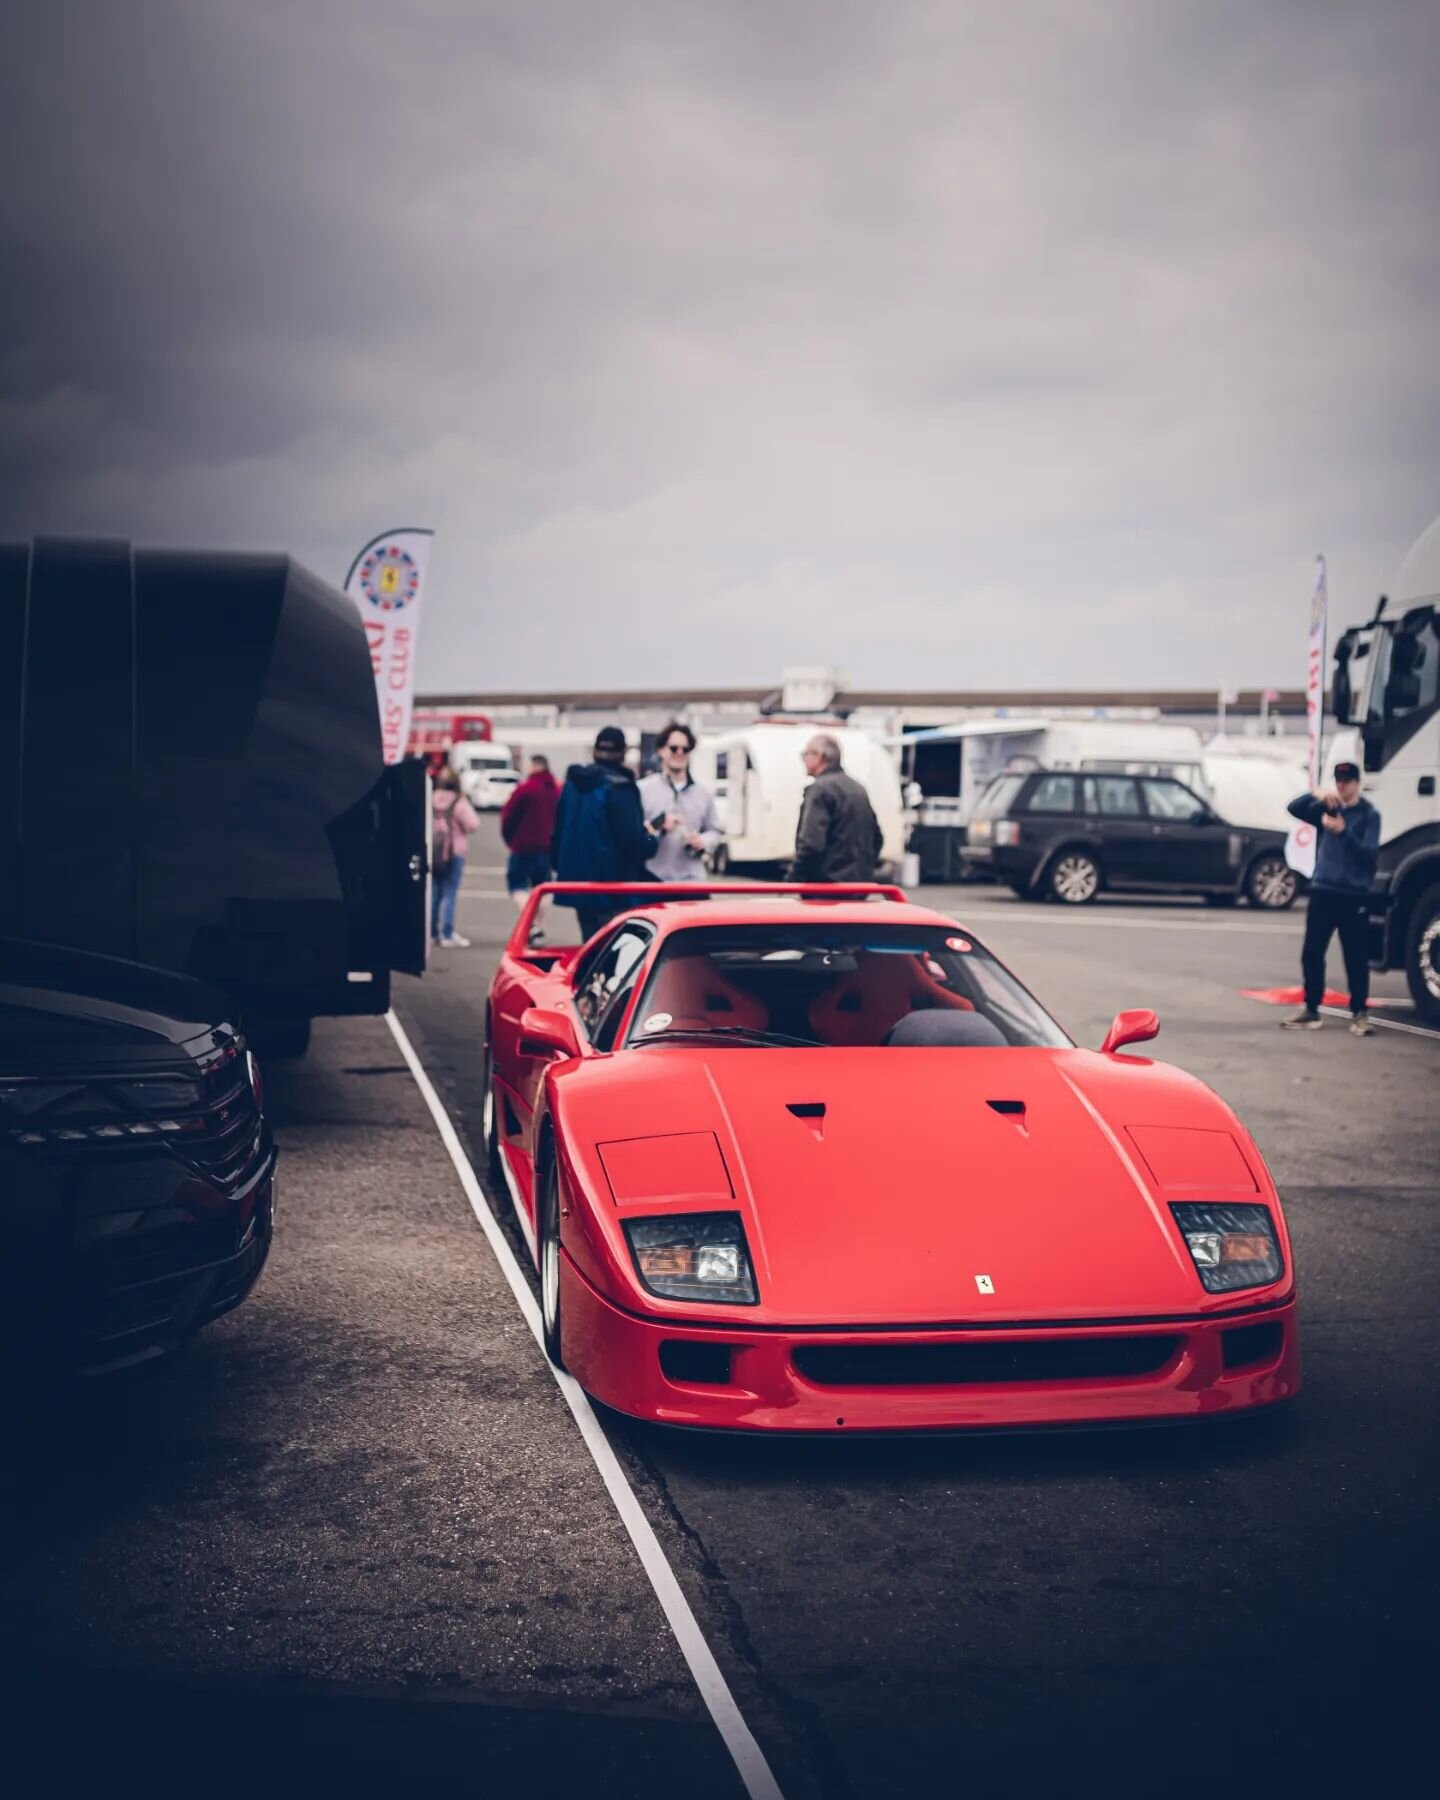 Been wanting to go to @doningtonhistoricfestival for years. A very nice event with a pretty decent variety every year. This year included this rather nice F40. Plus if you go to the stands the sound is insane. #DoningtonHistoric #Ferrari #F40 #Superc